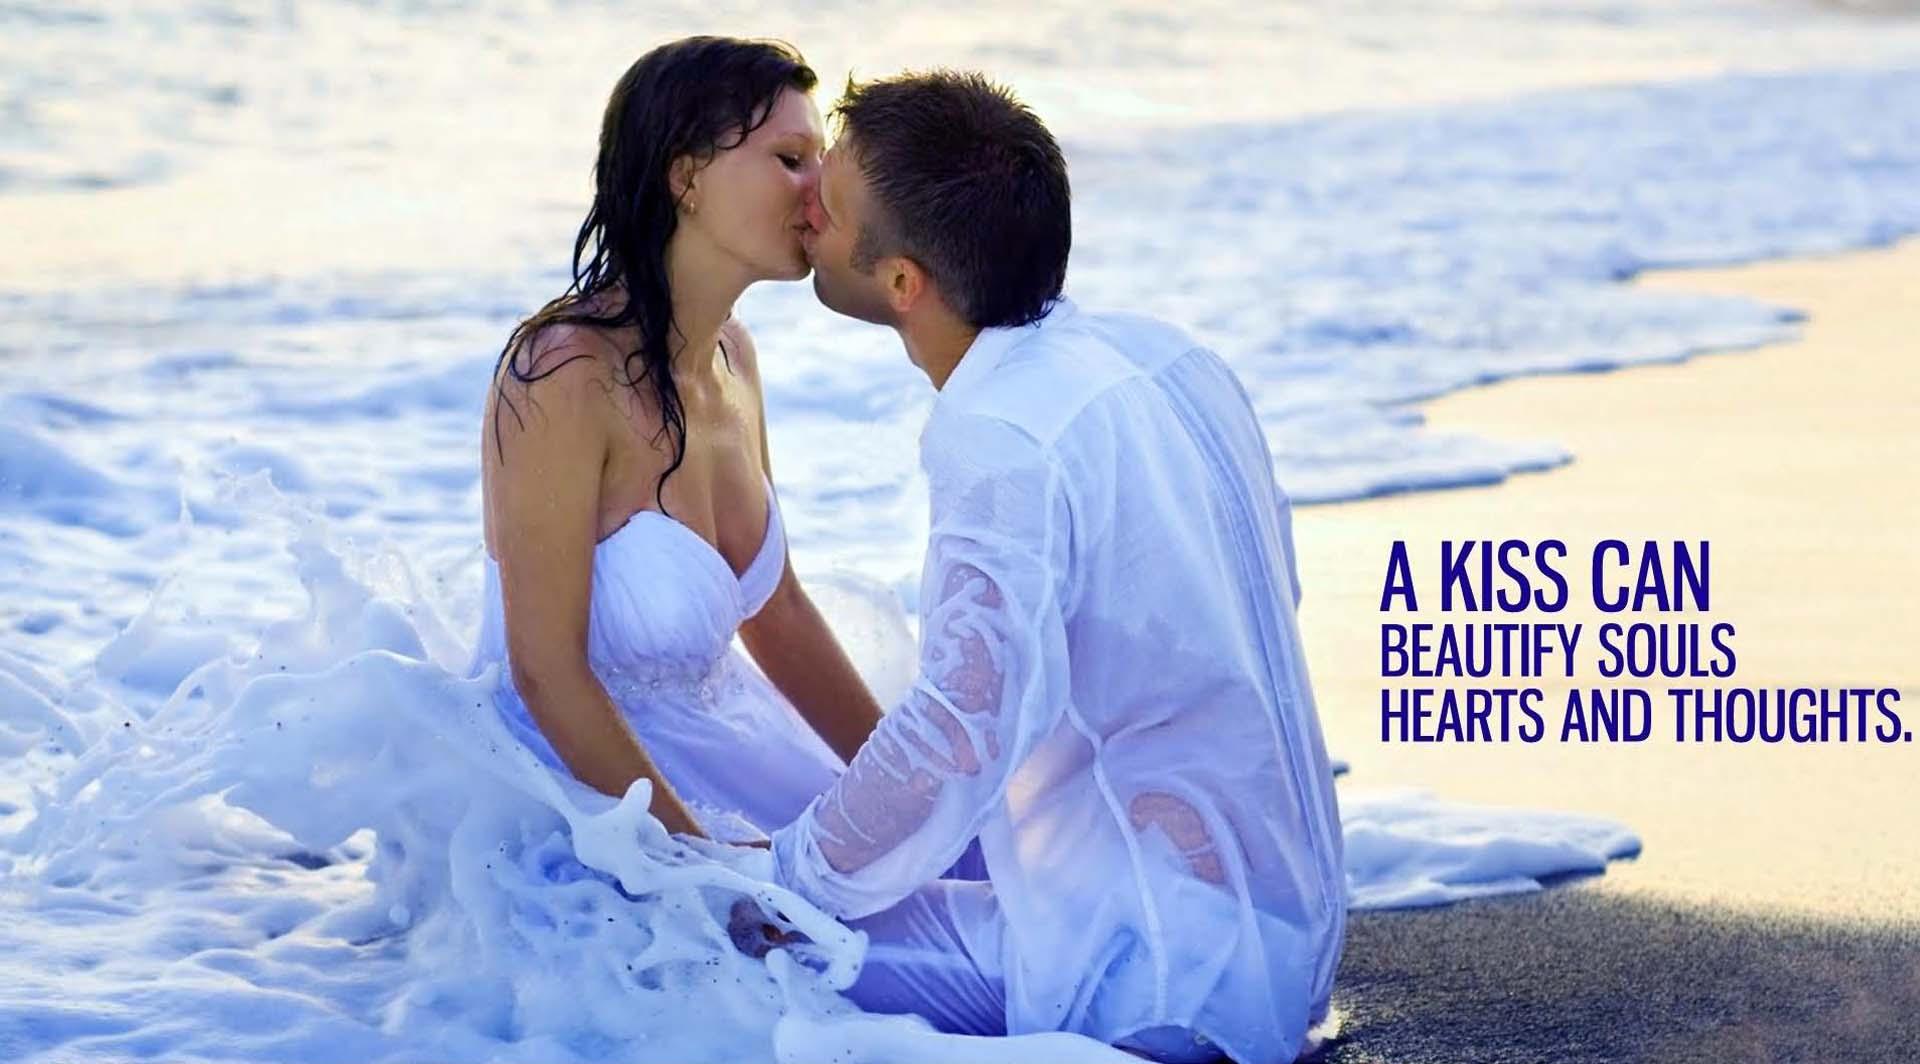 Best Kiss Quotes To Inspire You